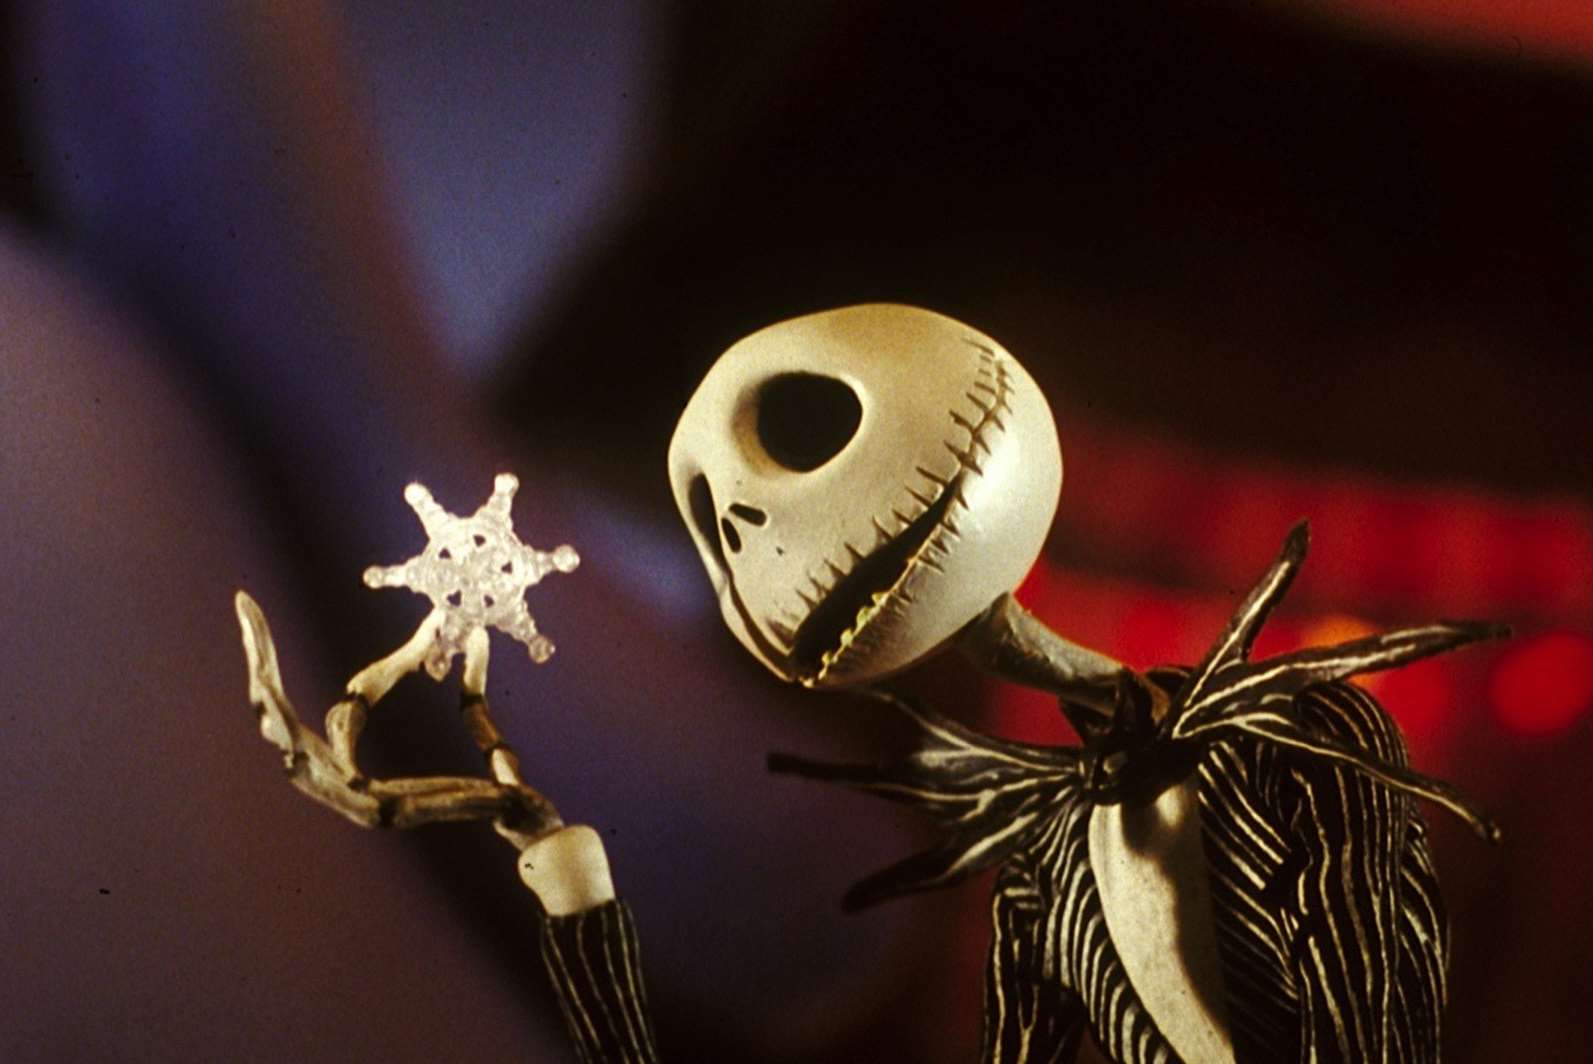 The Nightmare Before Christmas will be screened in Canterbury